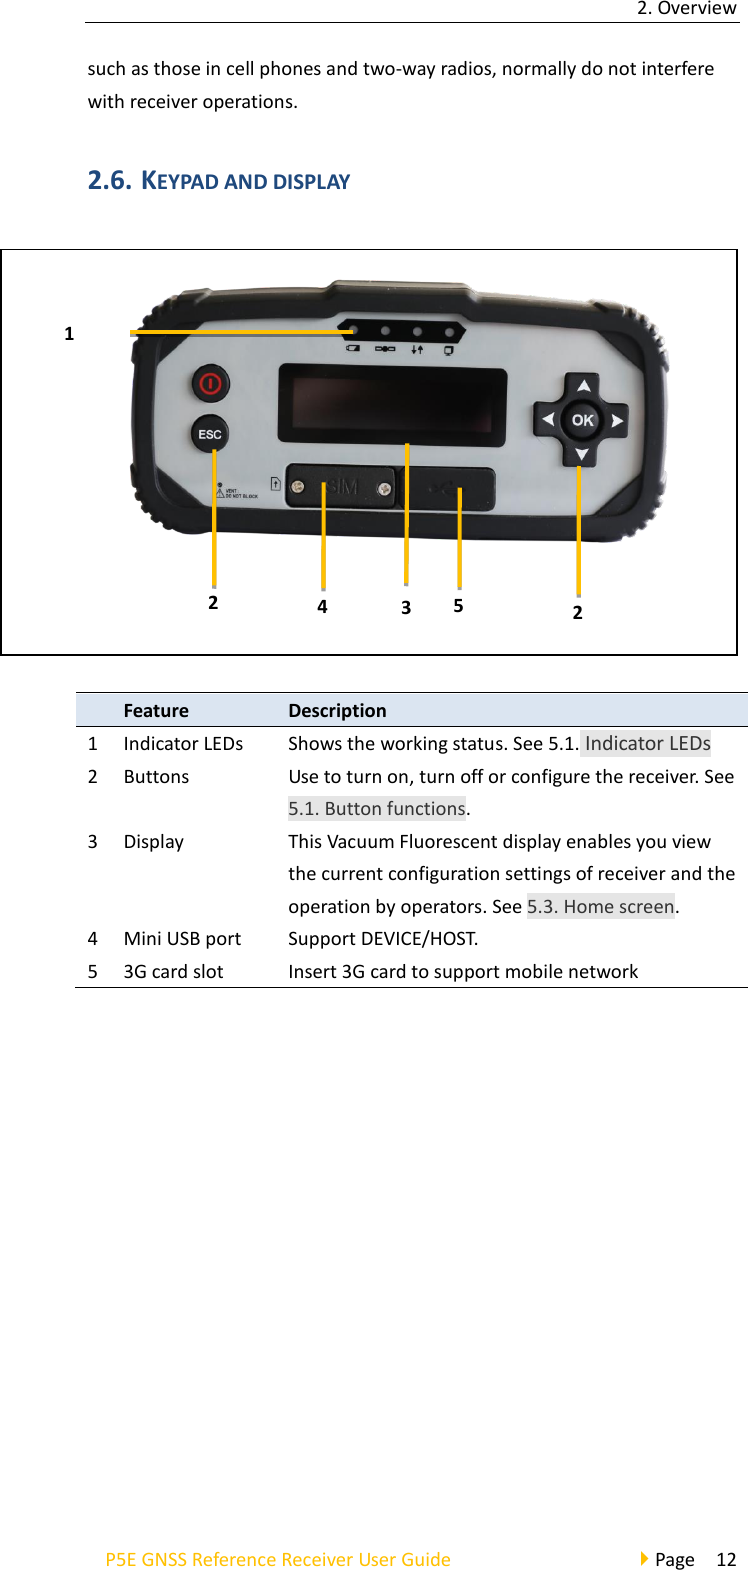 2. Overview P5E GNSS Reference Receiver User Guide                                     Page  12 such as those in cell phones and two-way radios, normally do not interfere with receiver operations. 2.6. KEYPAD AND DISPLAY     Feature   Description   1 Indicator LEDs Shows the working status. See 5.1. Indicator LEDs 2 Buttons   Use to turn on, turn off or configure the receiver. See 5.1. Button functions. 3 Display This Vacuum Fluorescent display enables you view the current configuration settings of receiver and the operation by operators. See 5.3. Home screen.   4 Mini USB port Support DEVICE/HOST. 5 3G card slot Insert 3G card to support mobile network    1 2 3 2 5 4 